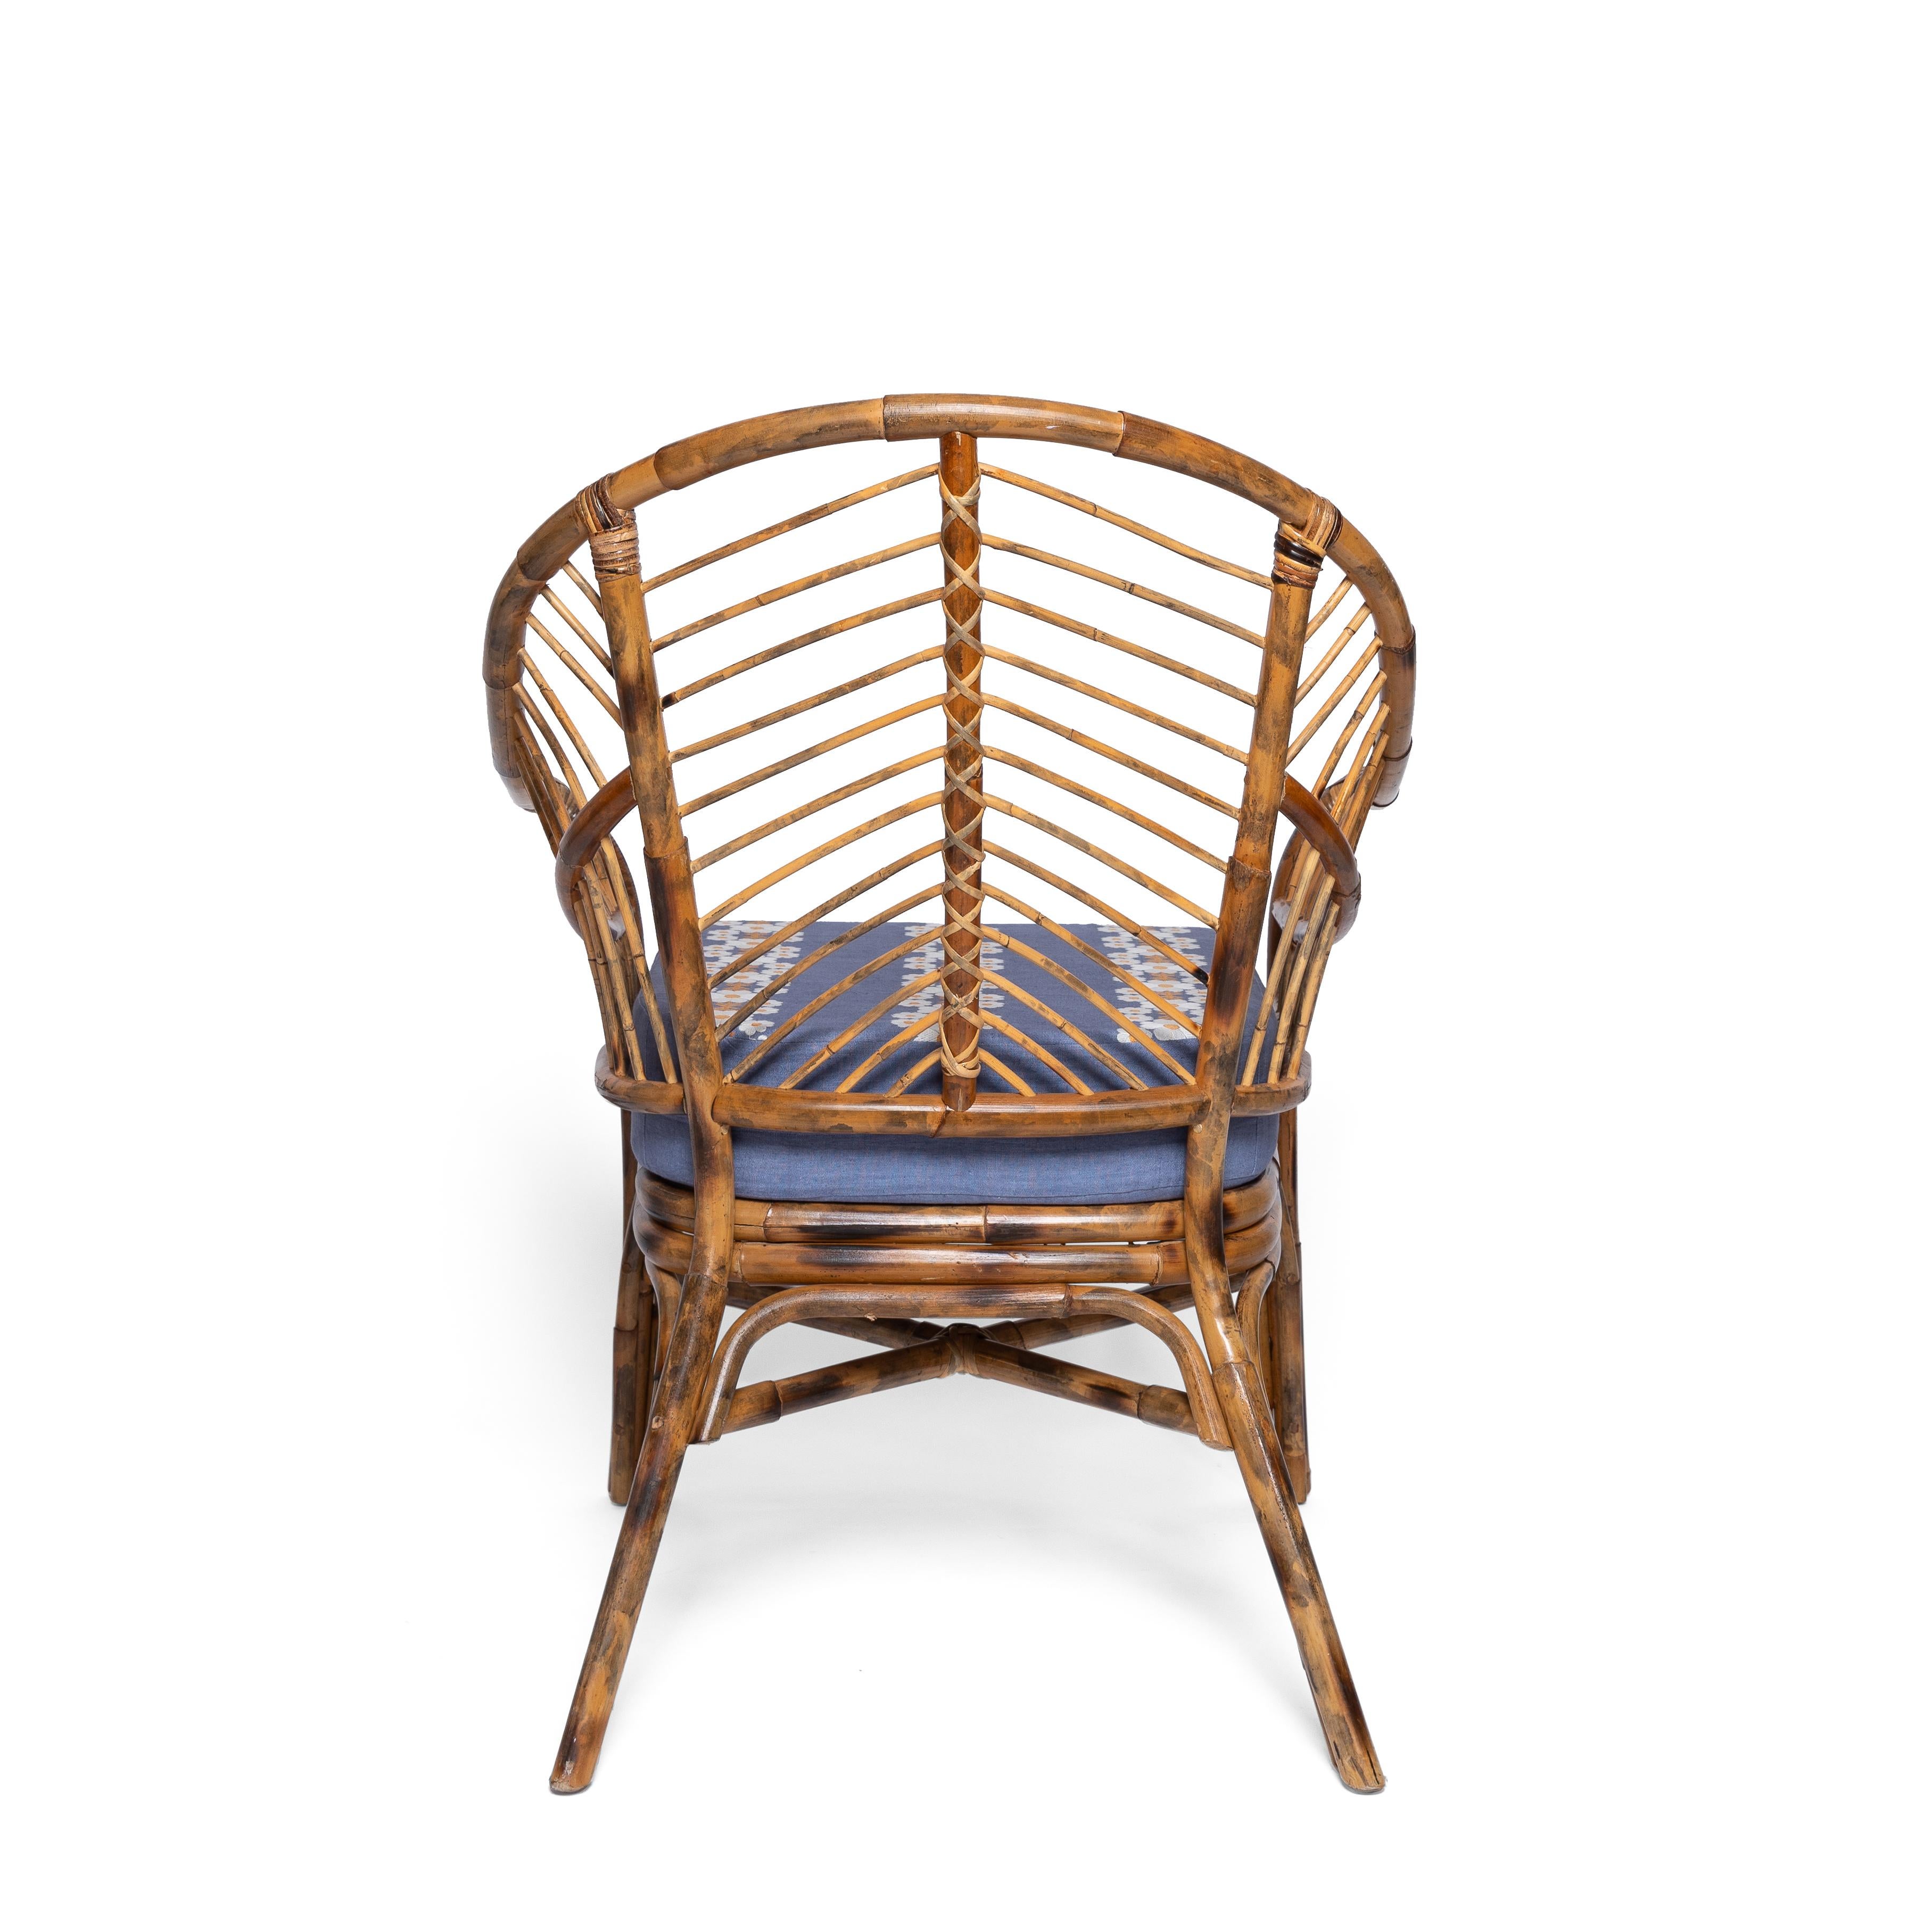 Indonesian Bamboo Chair in Natural Rattan, blue cushion, Modern by Sharland England For Sale